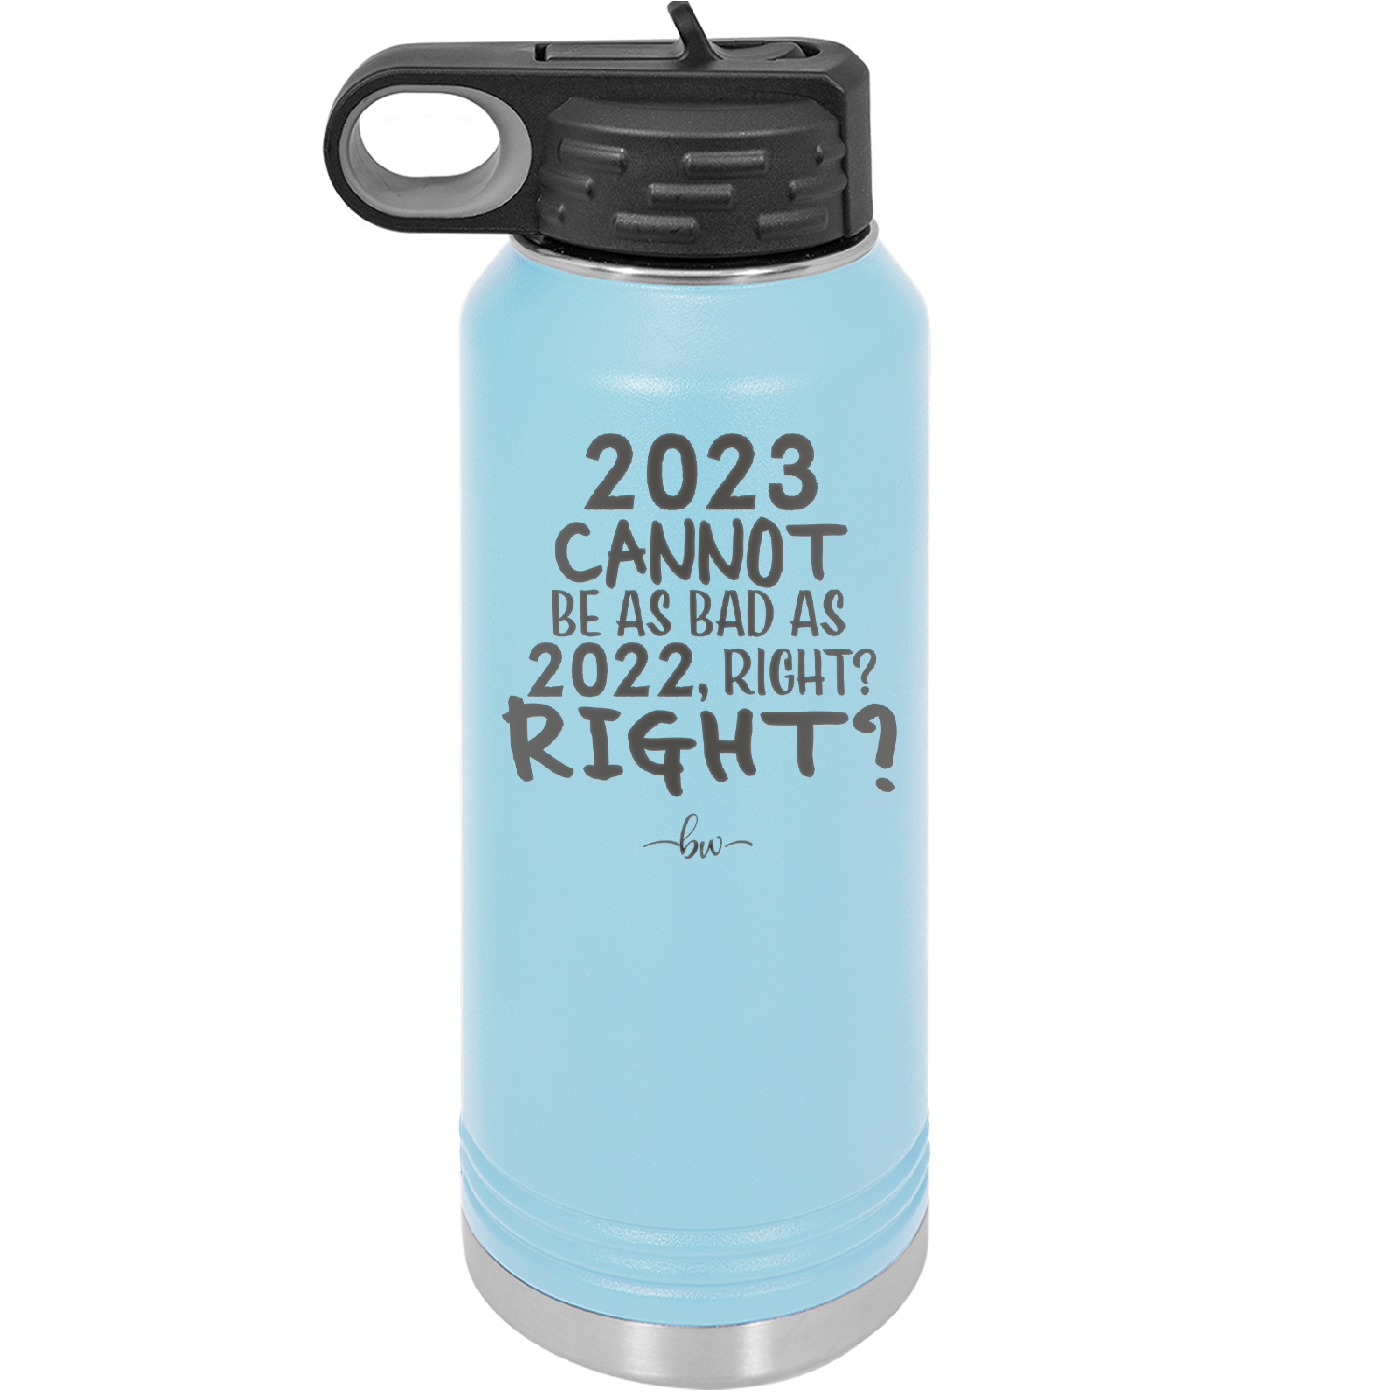 32 oz water bottle 2023 cannot be as bas as 2022, right?right? -  sky